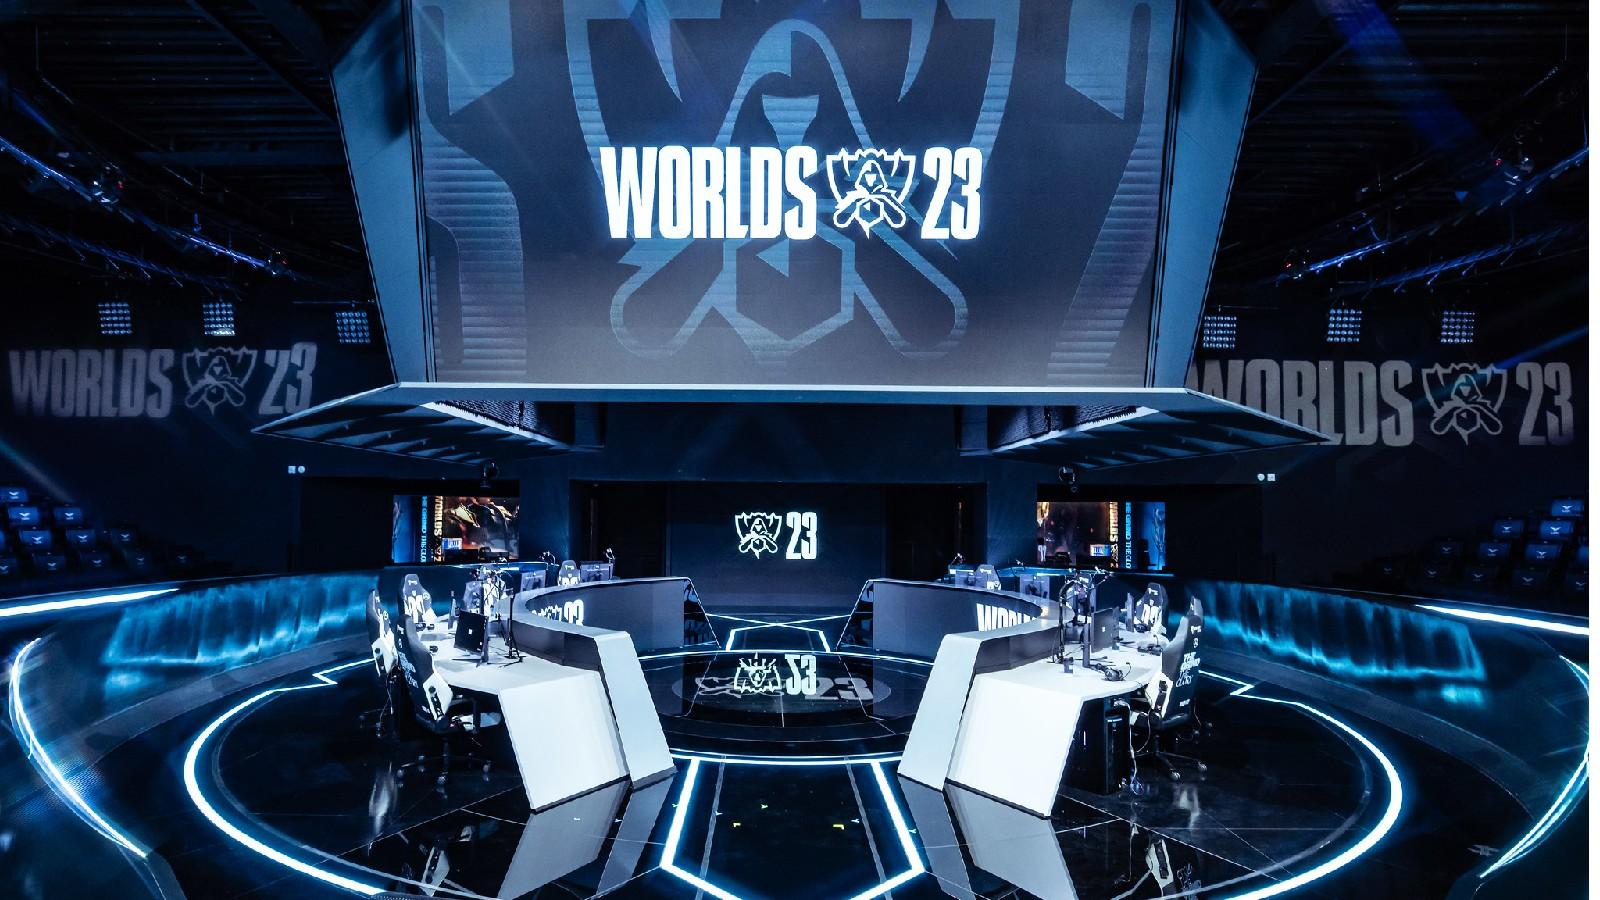 LoL Worlds 2023: Starting Date, Schedule, Teams & More